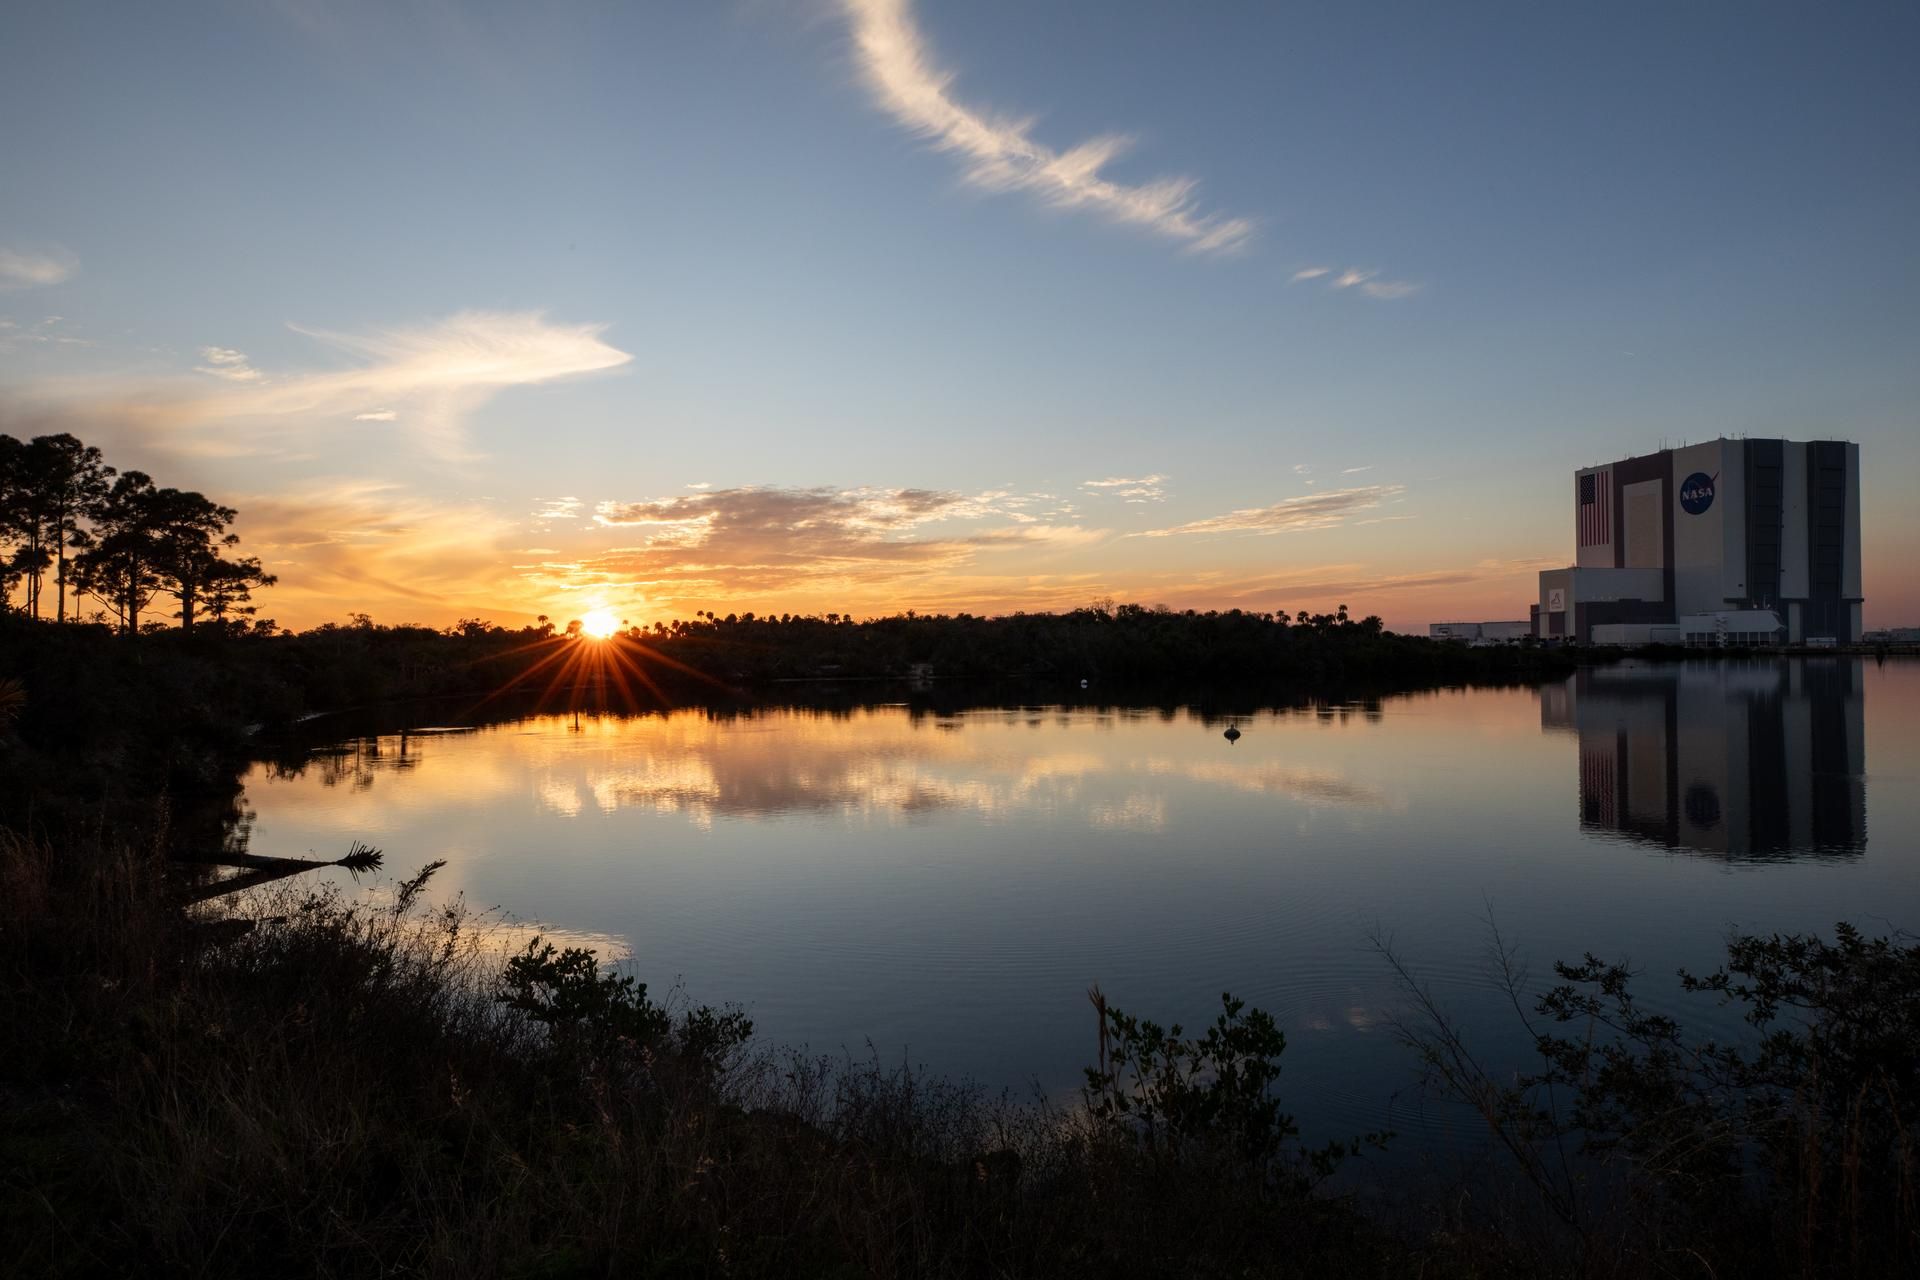 a still body of water rests, flanked on the left by overbrush and a few trees. The shoreline curves back toward a tall cube building, reflected in the water across from the rising sun on the horizon.